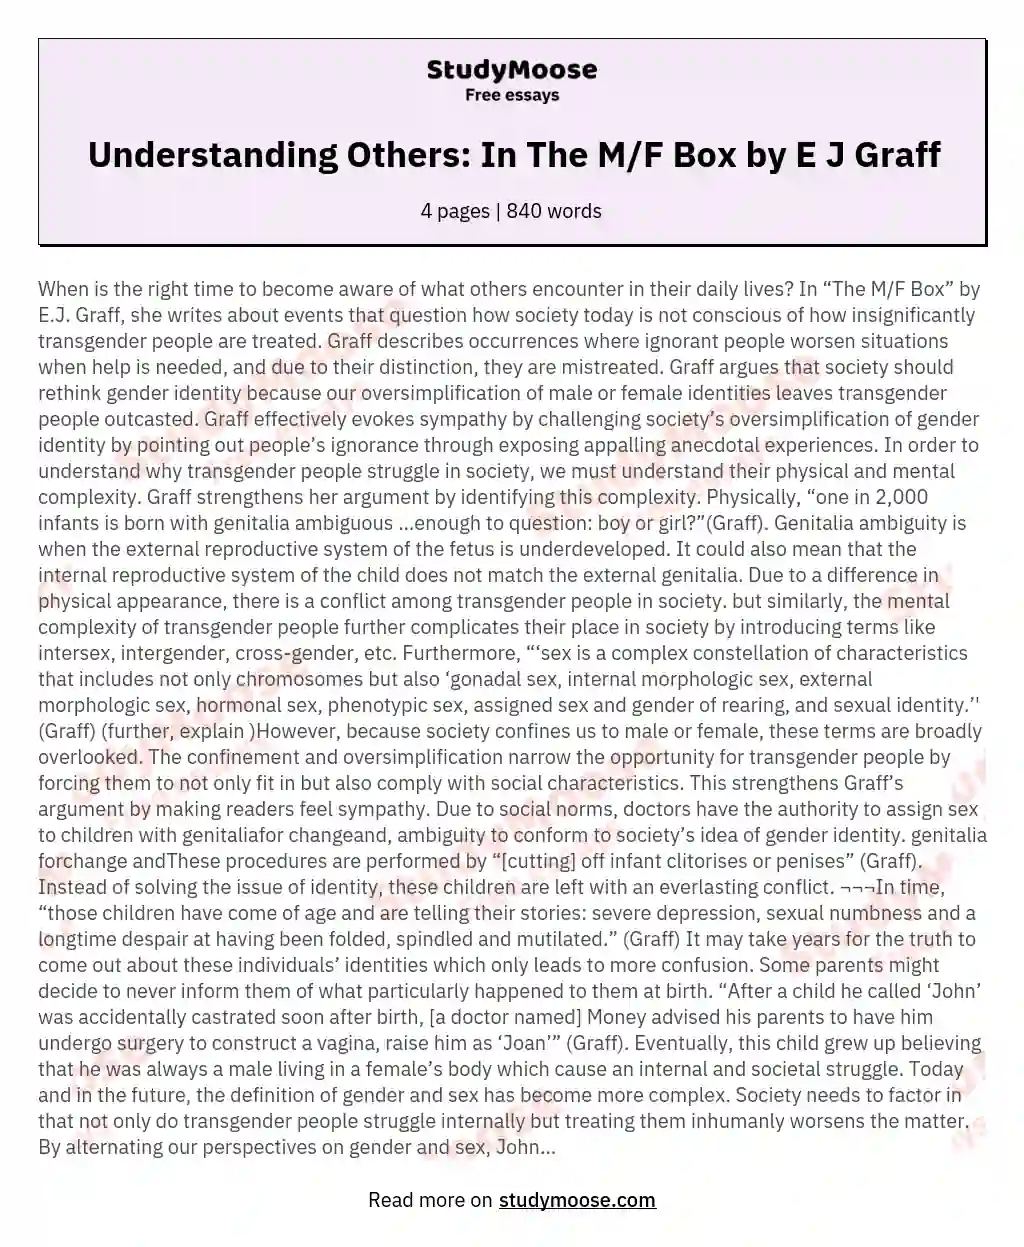 Understanding Others: In The M/F Box by E J Graff essay